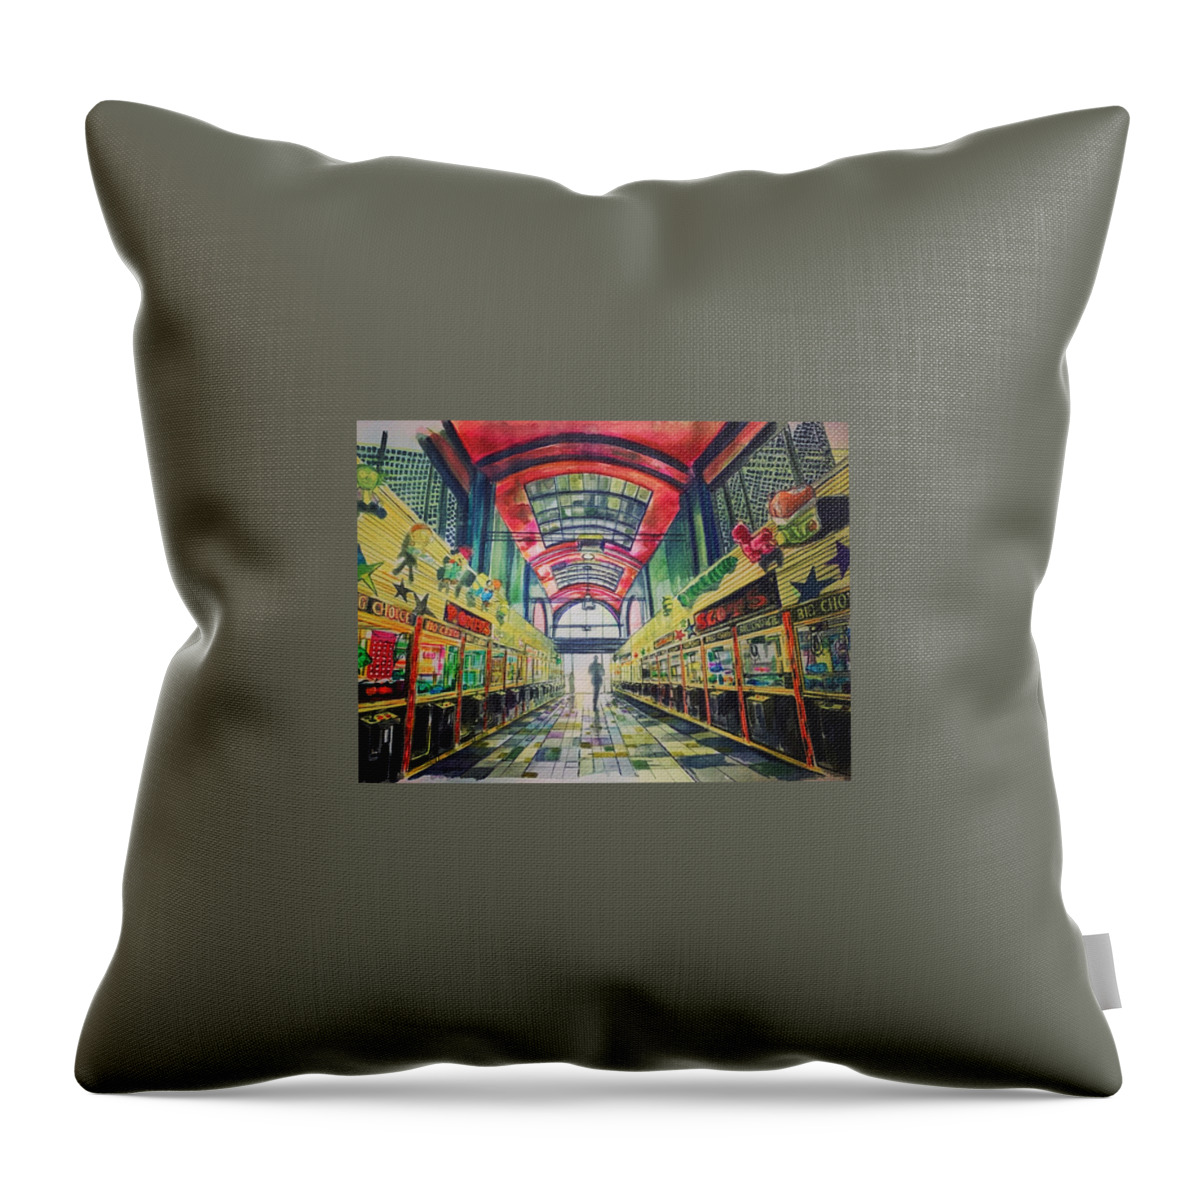  Throw Pillow featuring the painting Boardwalk by Try Cheatham